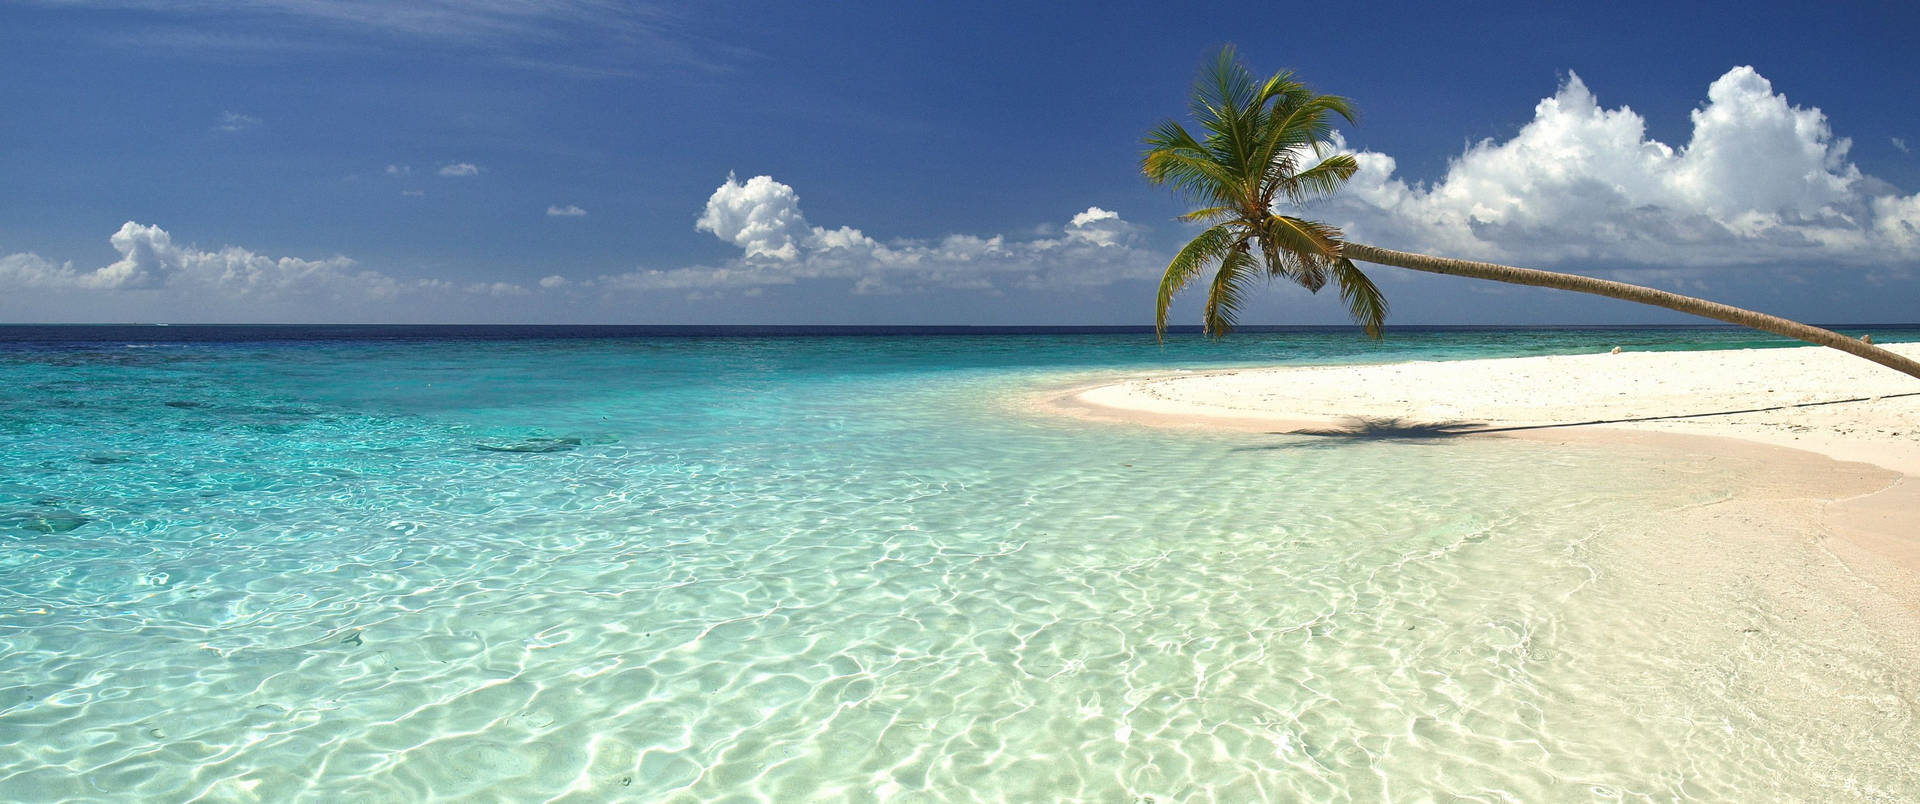 Ultrawide beach with clear blue waters and a bended palm tree leaning towards the ocean.